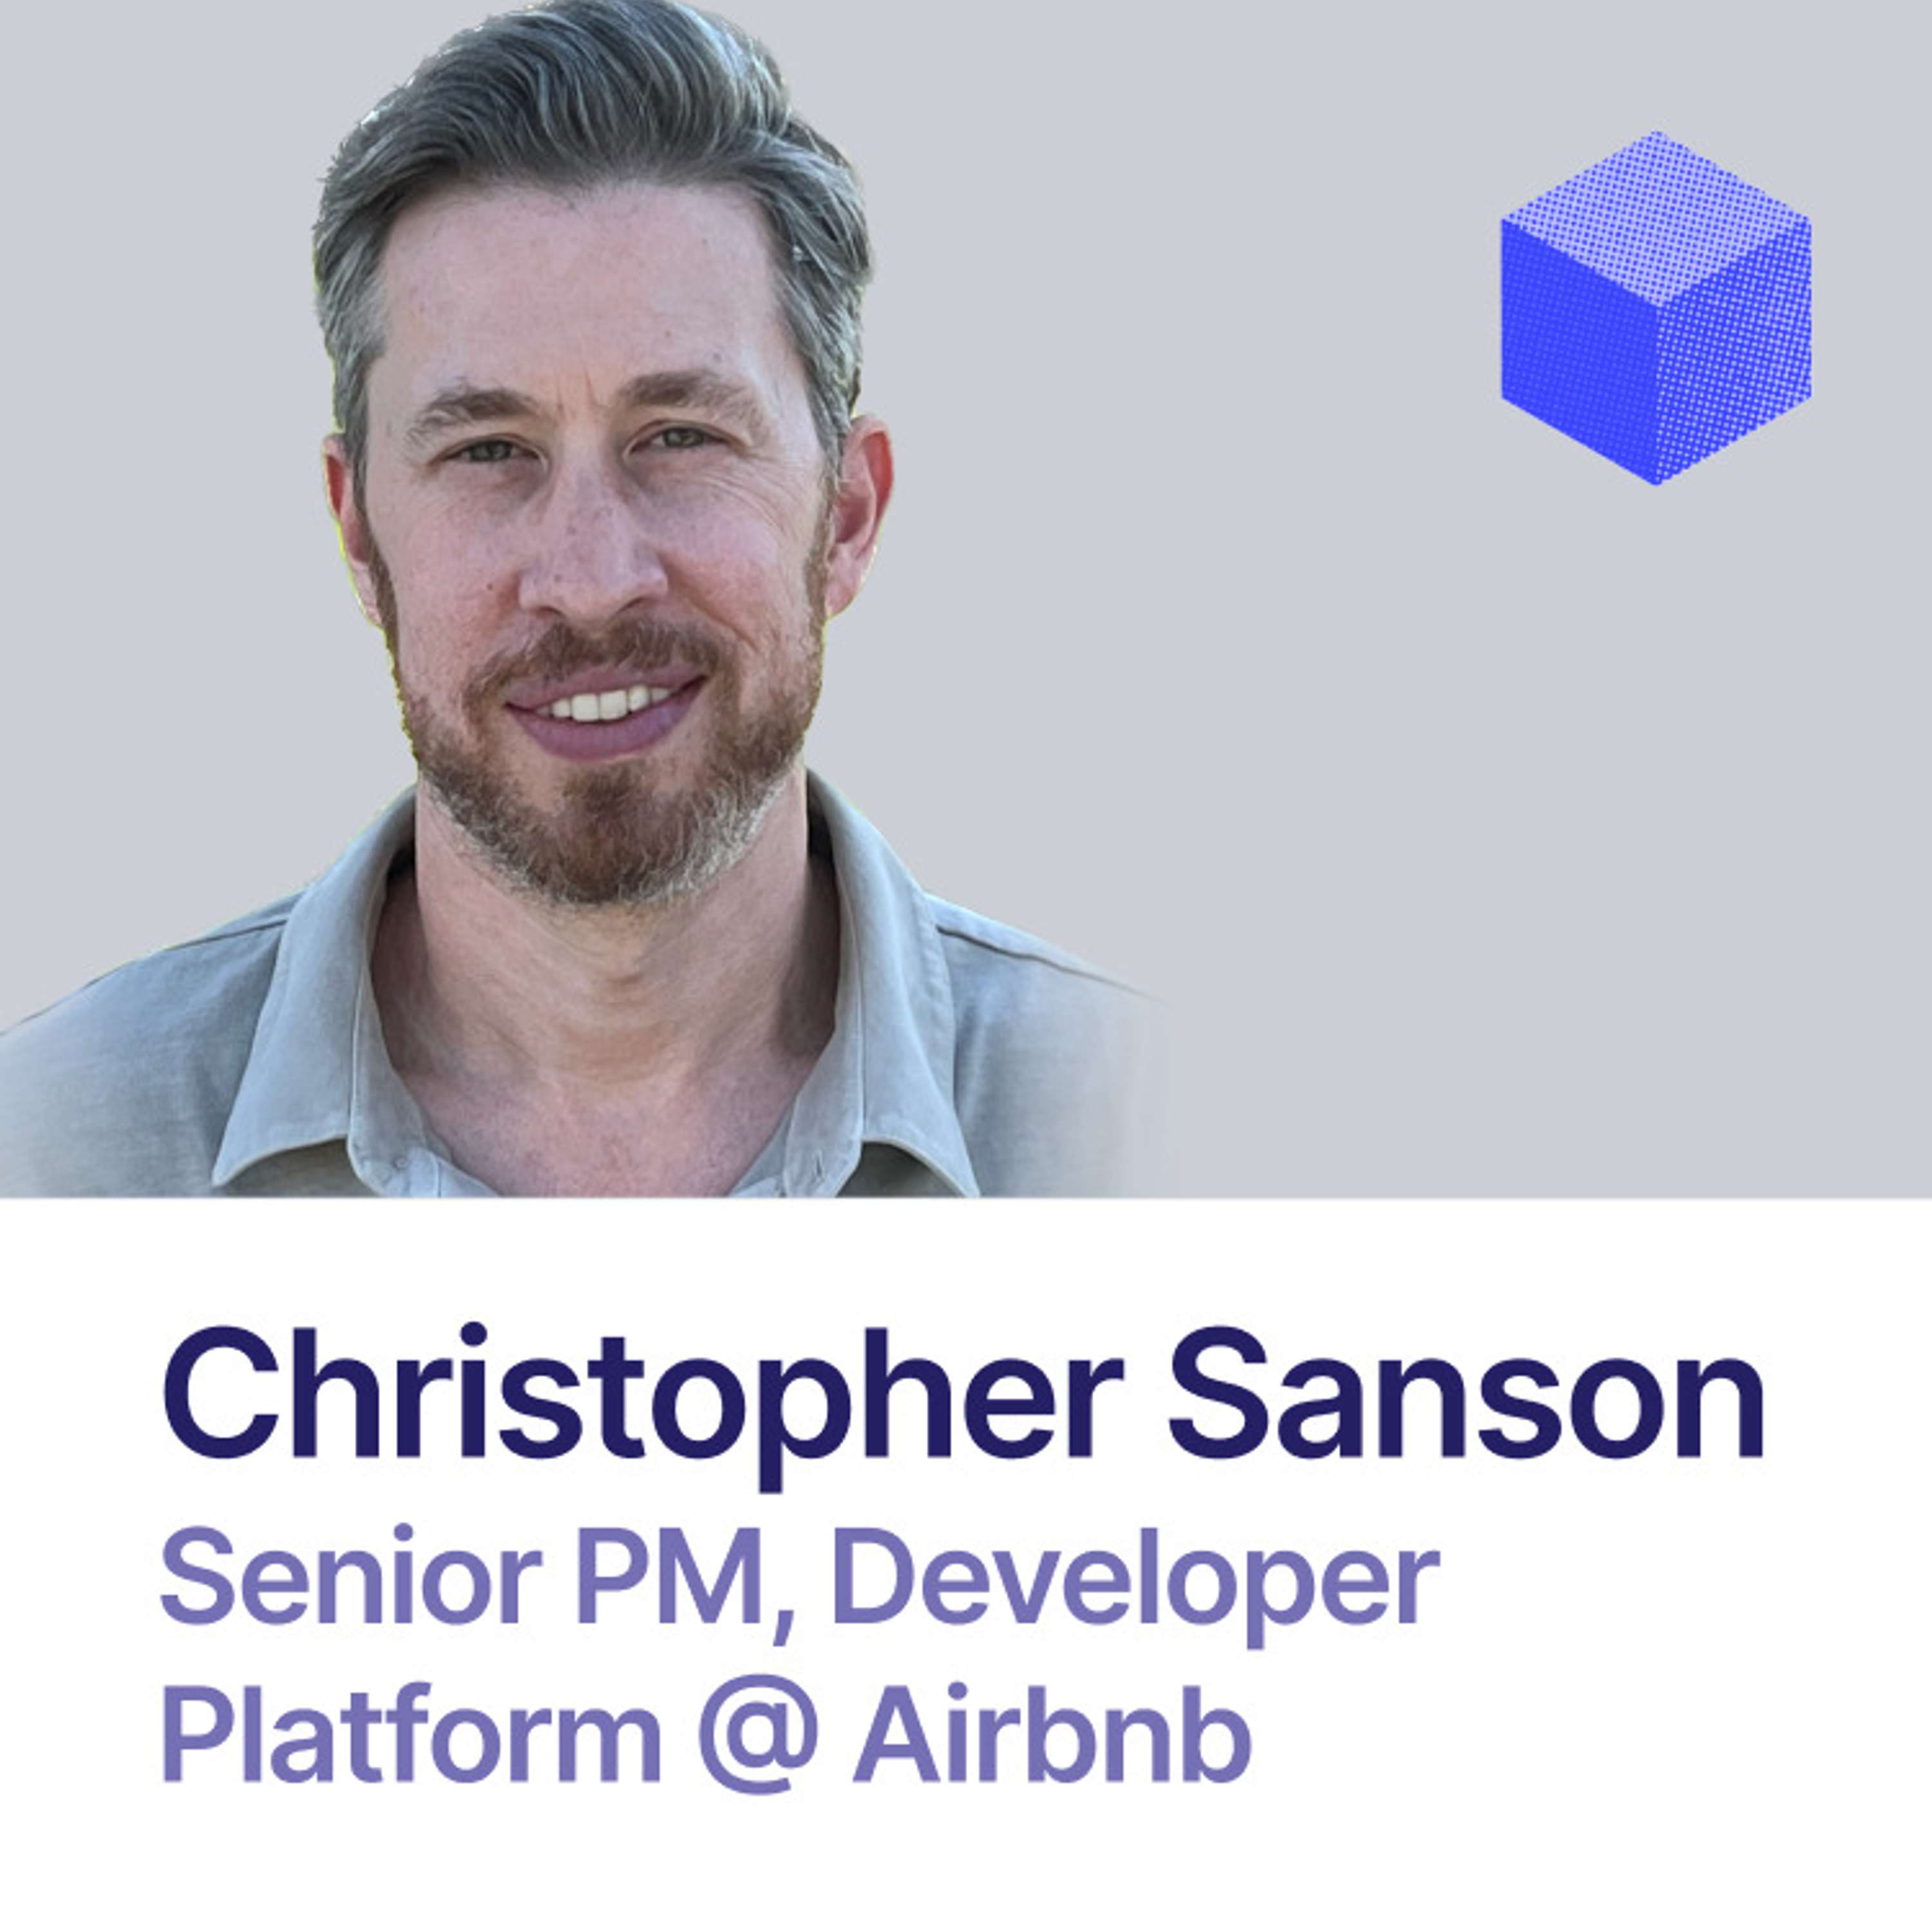 Measuring developer productivity at Airbnb | Christopher Sanson (Airbnb)